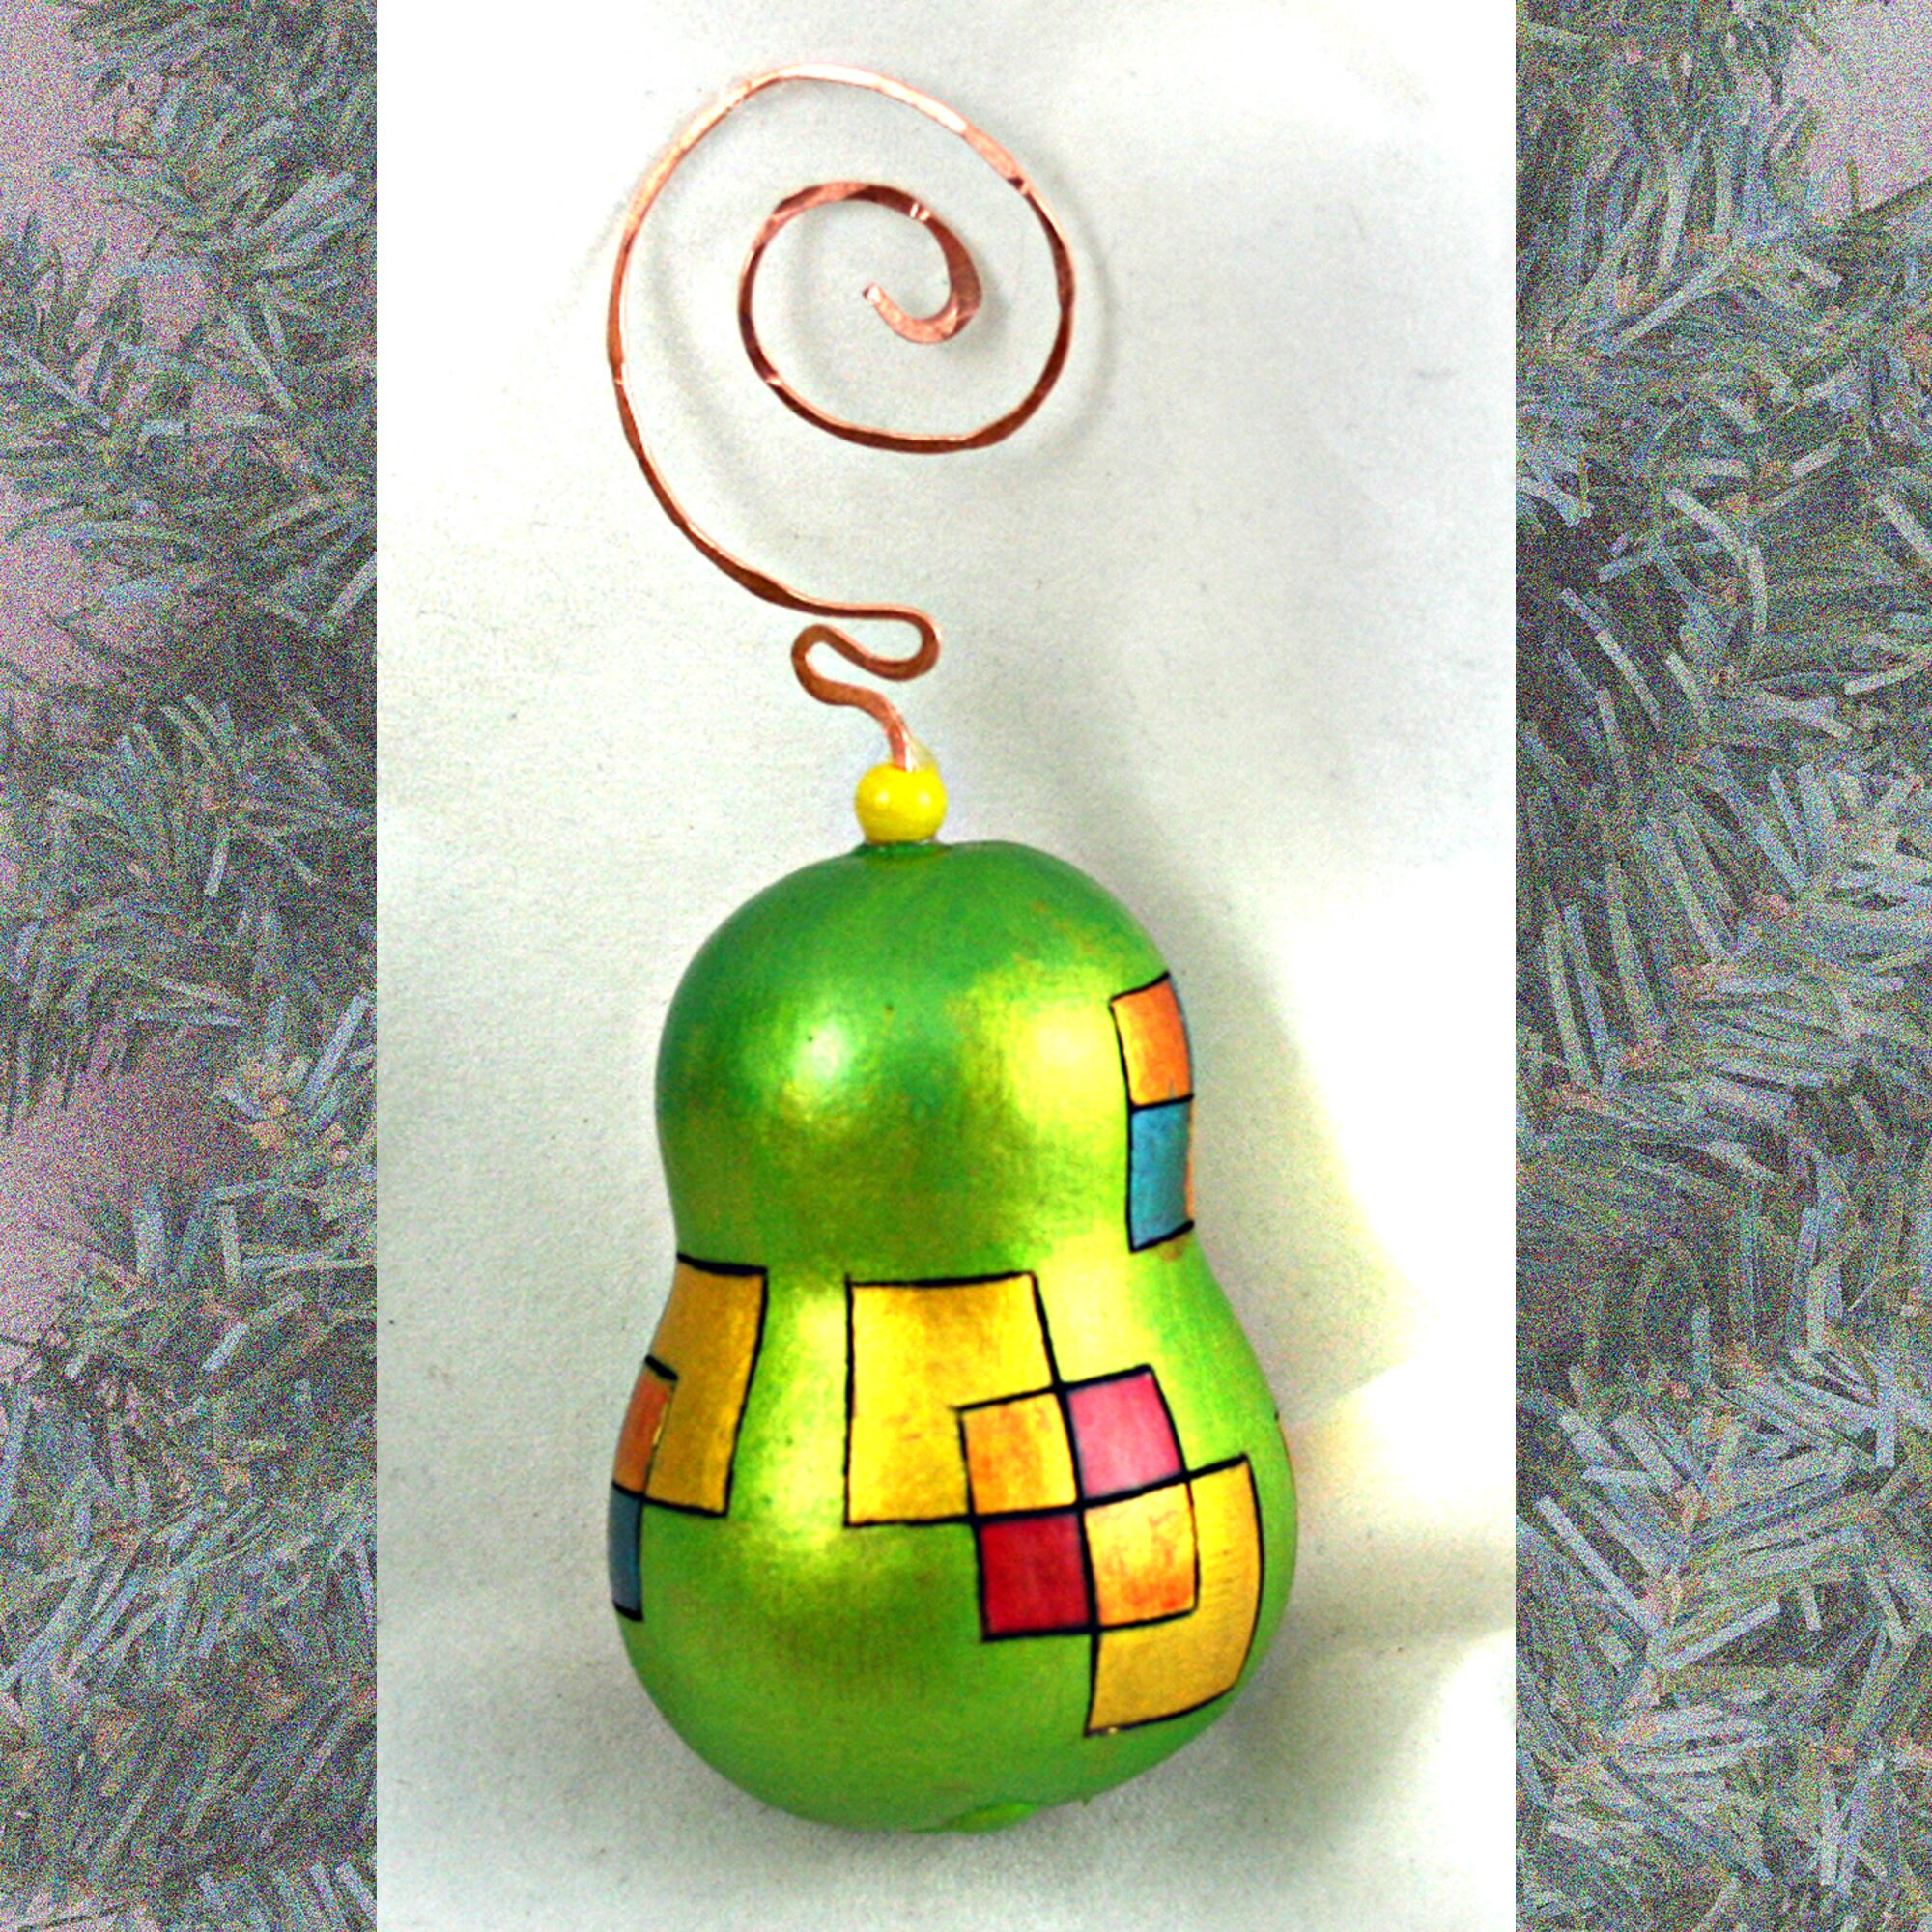 Gourd Christmas ornament with unique pattern burned and dyed with pounded copper hanger